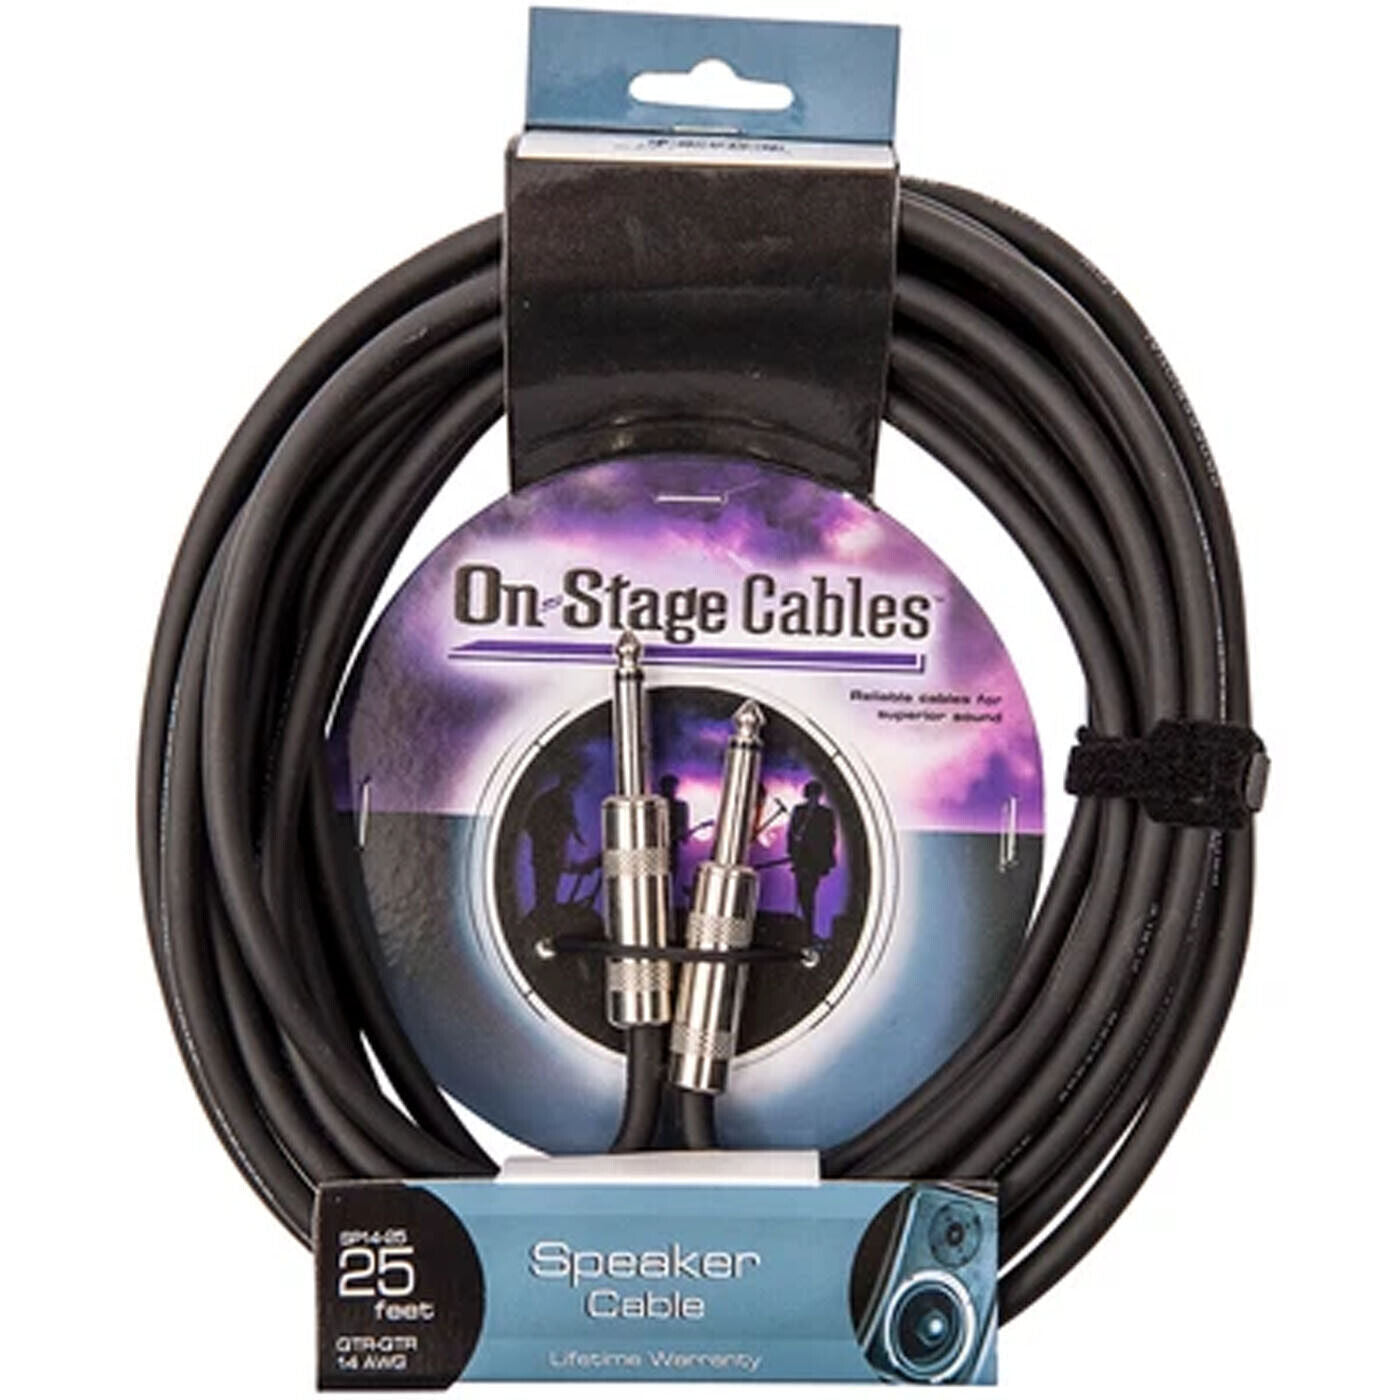 On Stage Speaker Cable Lead 7mm - Jack to Jack Connectors - 25ft / 7.5m Length |